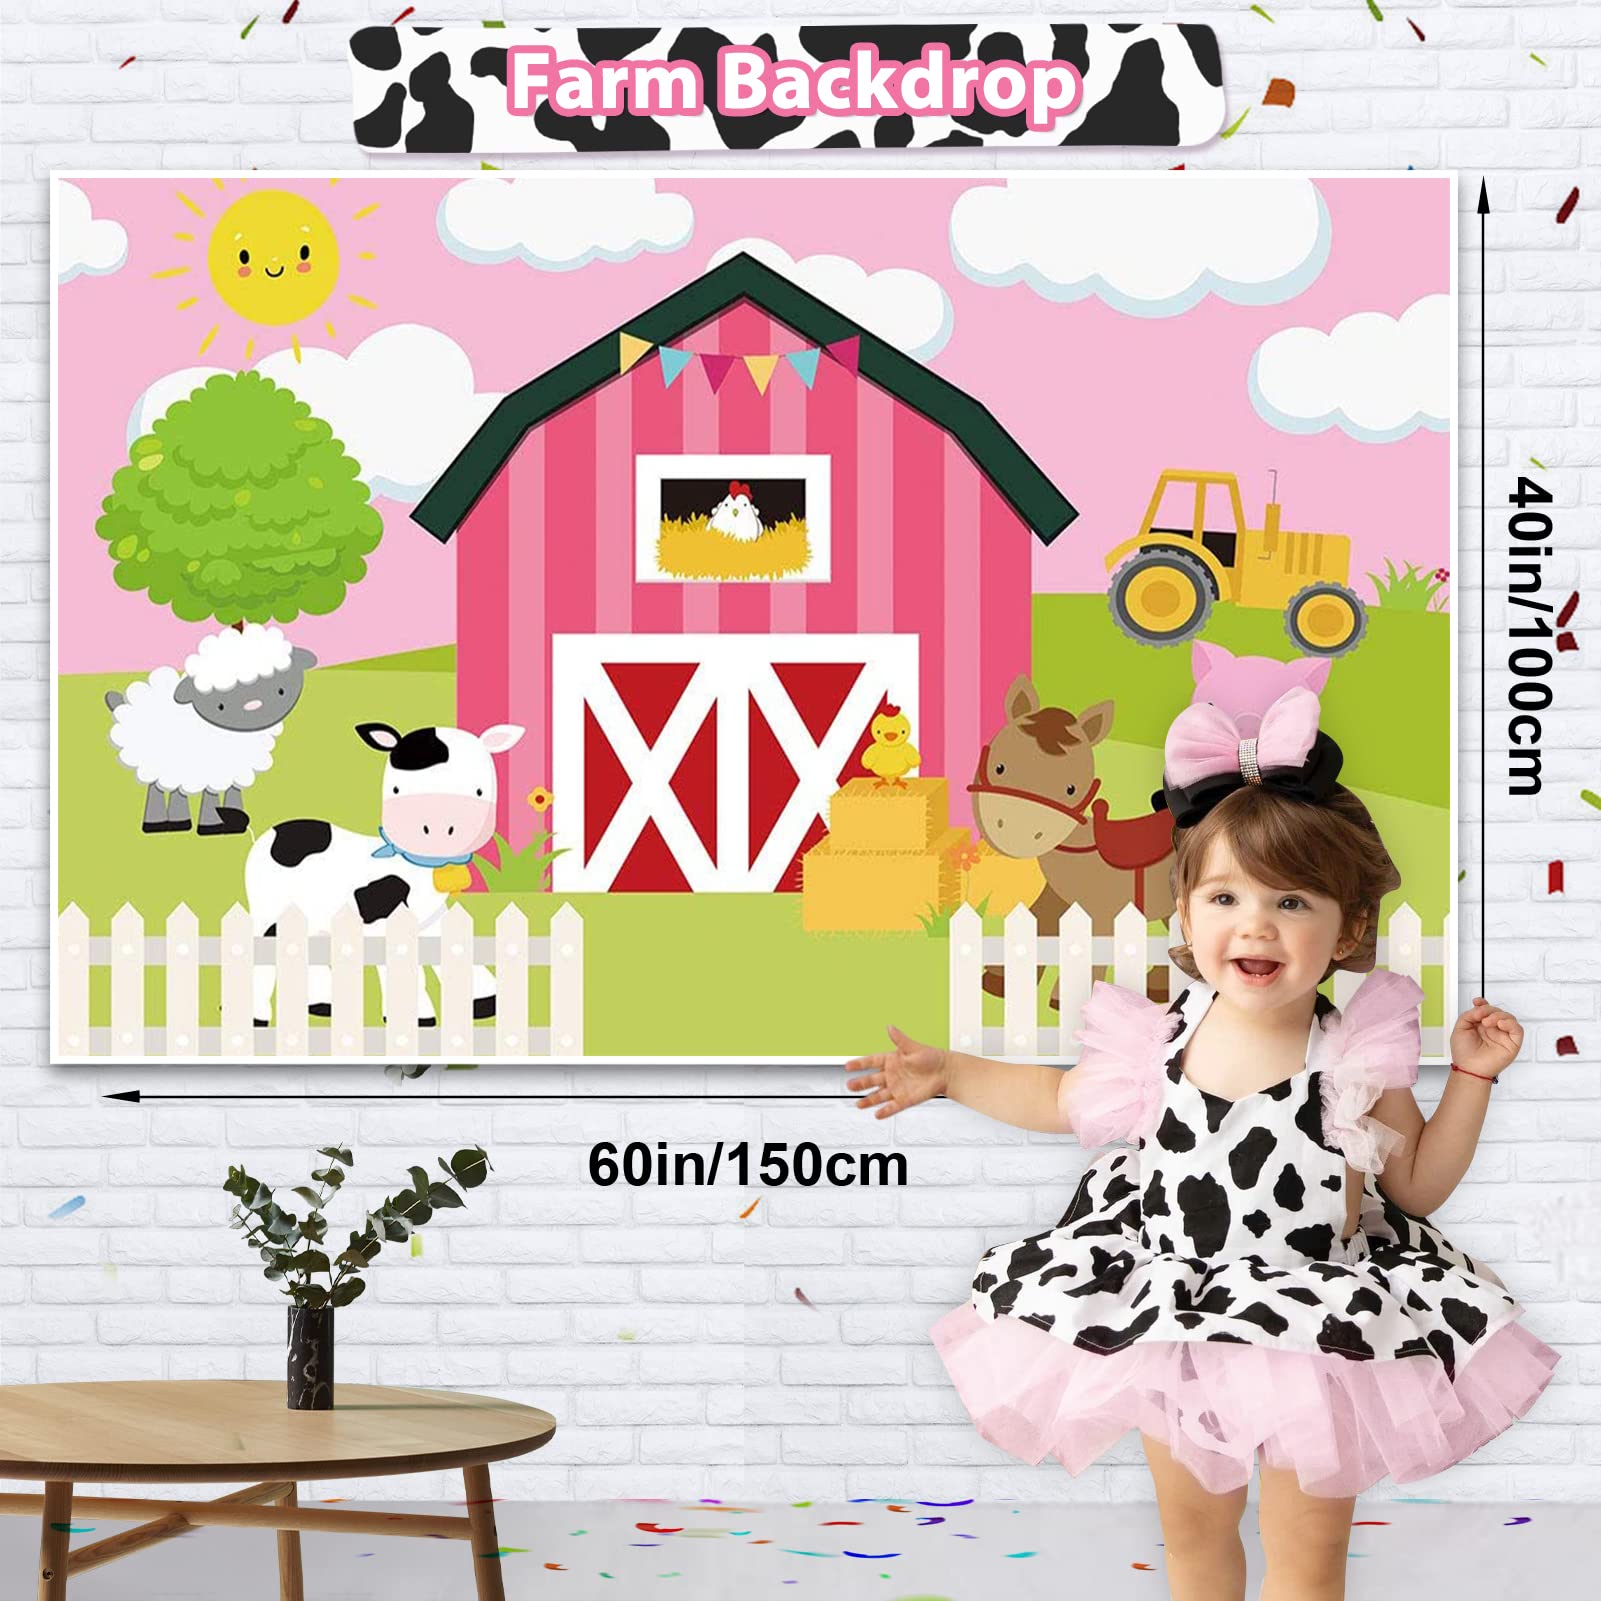 Winrayk Cow Birthday Party Decorations Supplies Farm Pink Cowgirl Cow Print Balloon Arch with Farm Backdrop Cow Print Tablecloth Cow Balloons Cow Print Party Decorations Kids Cow Birthday Decorations